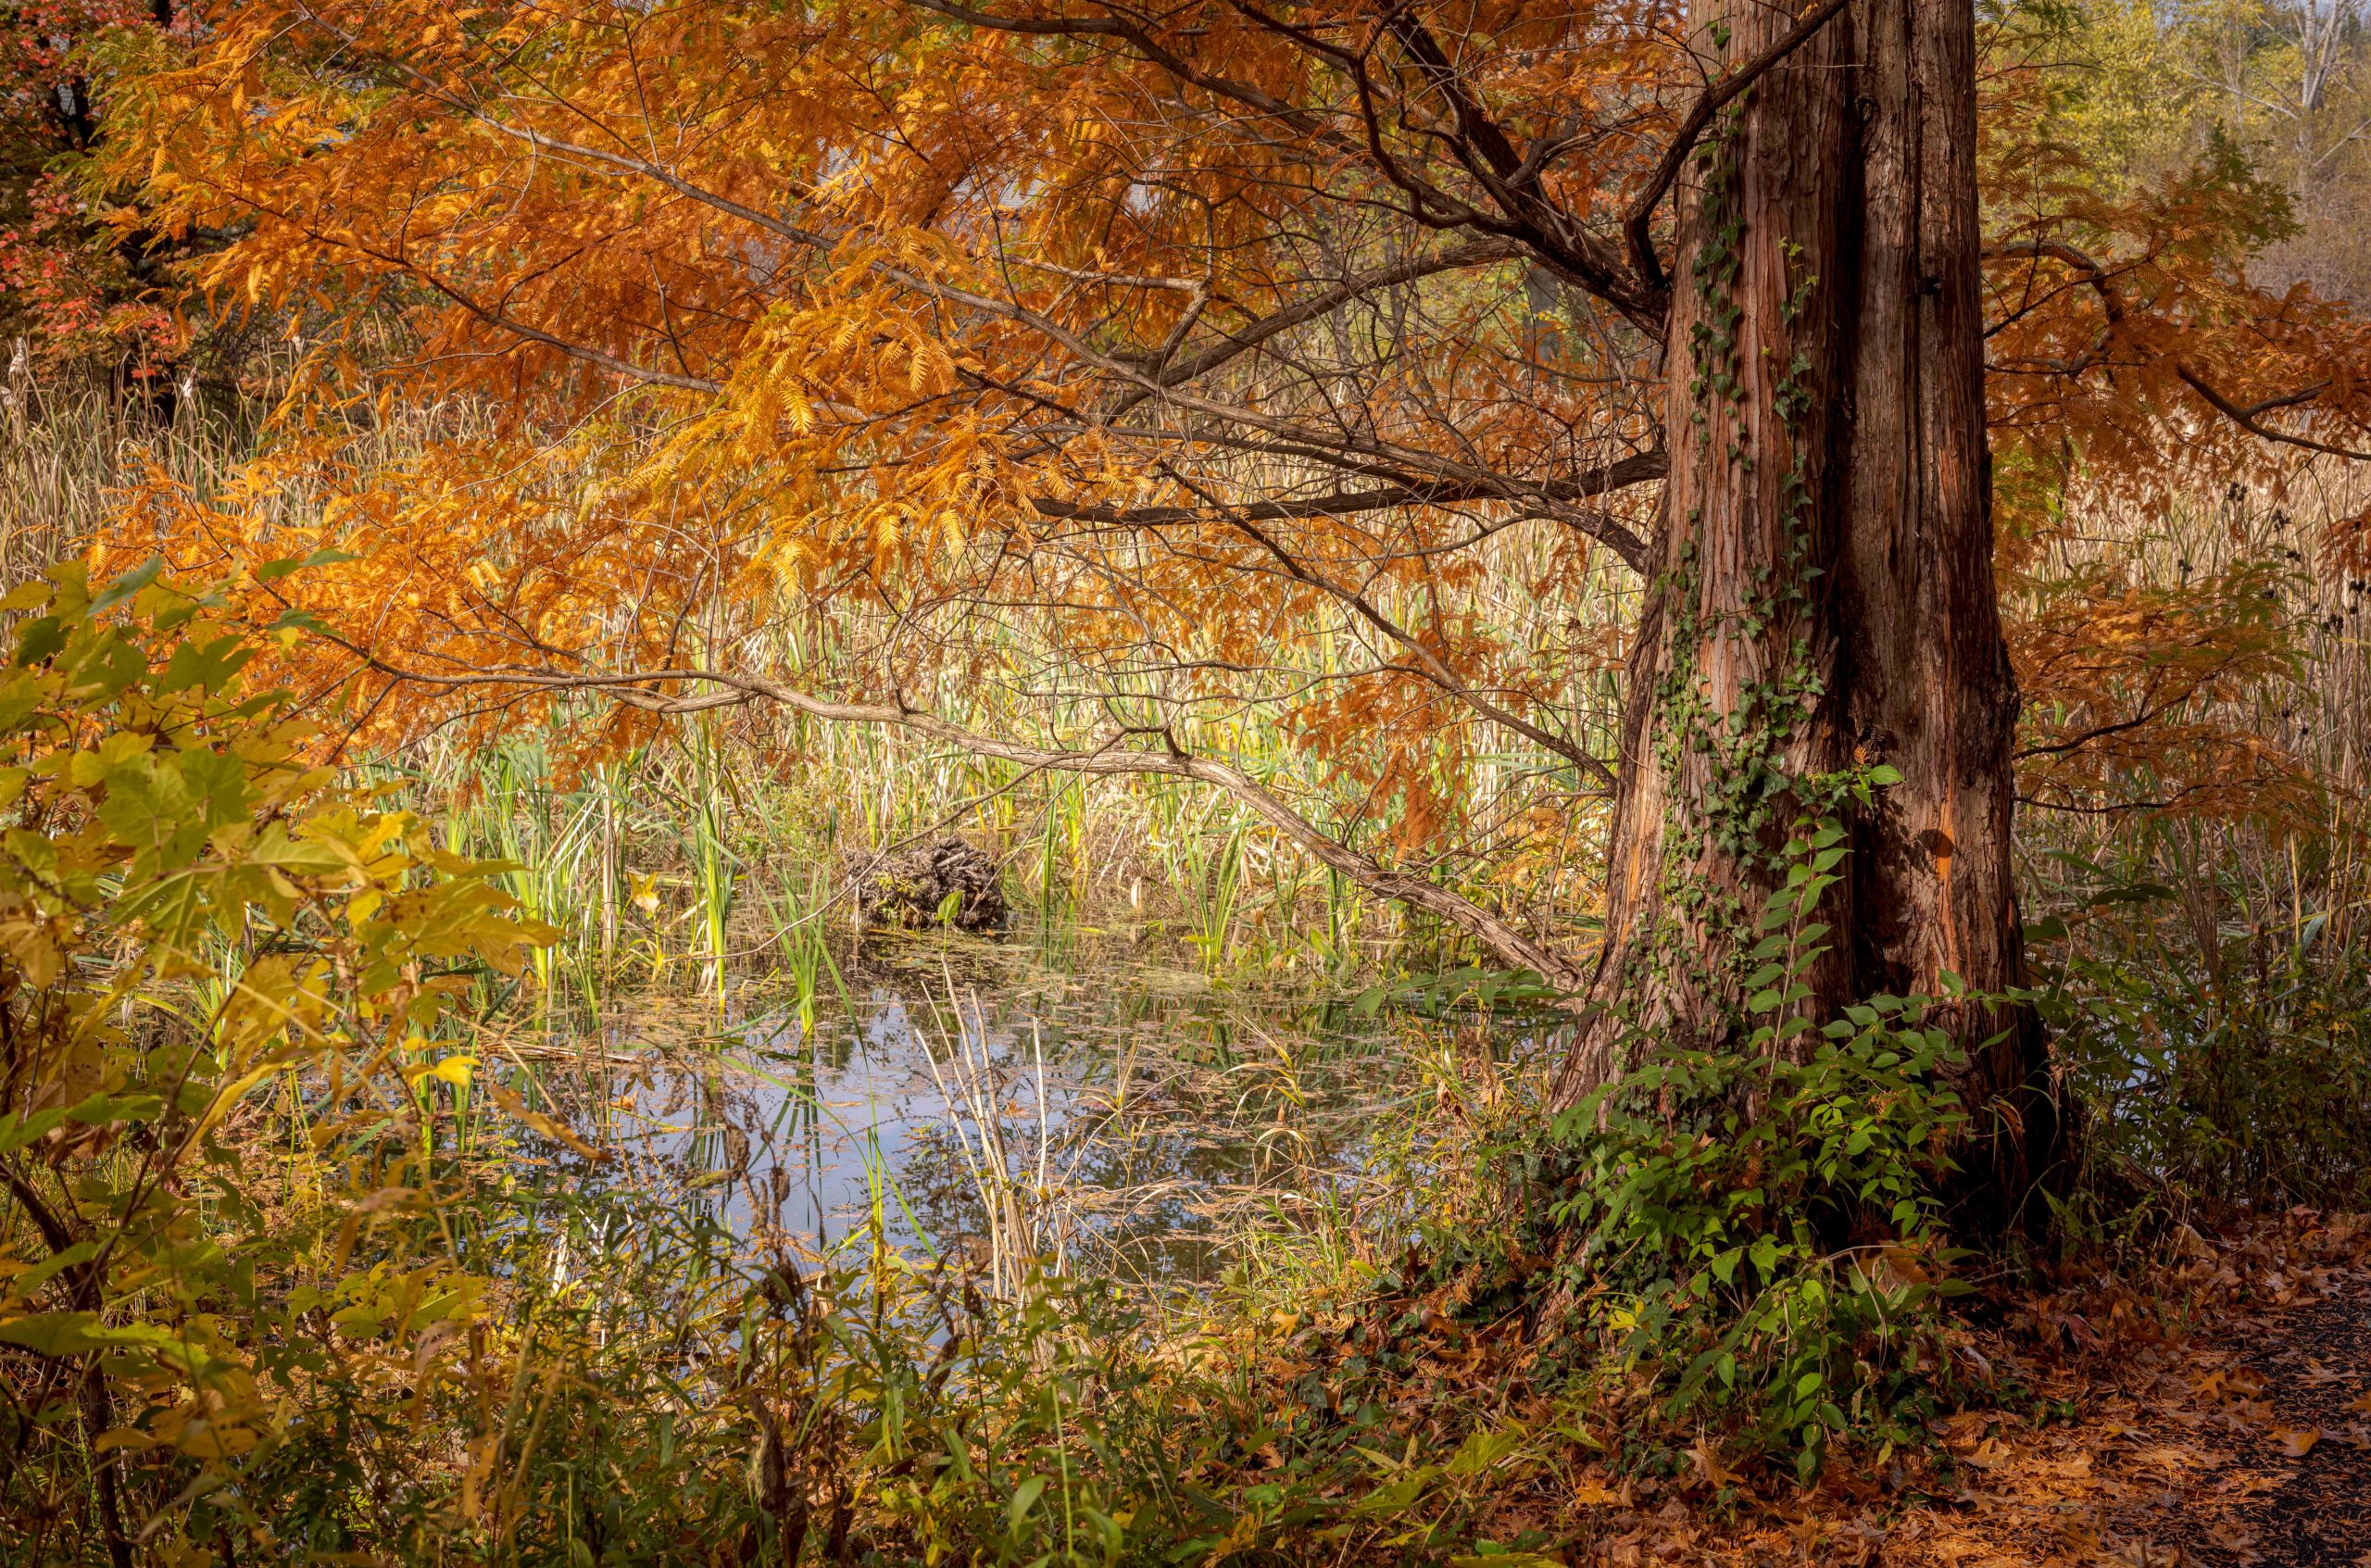 A marshy space layered with orange fall leaves